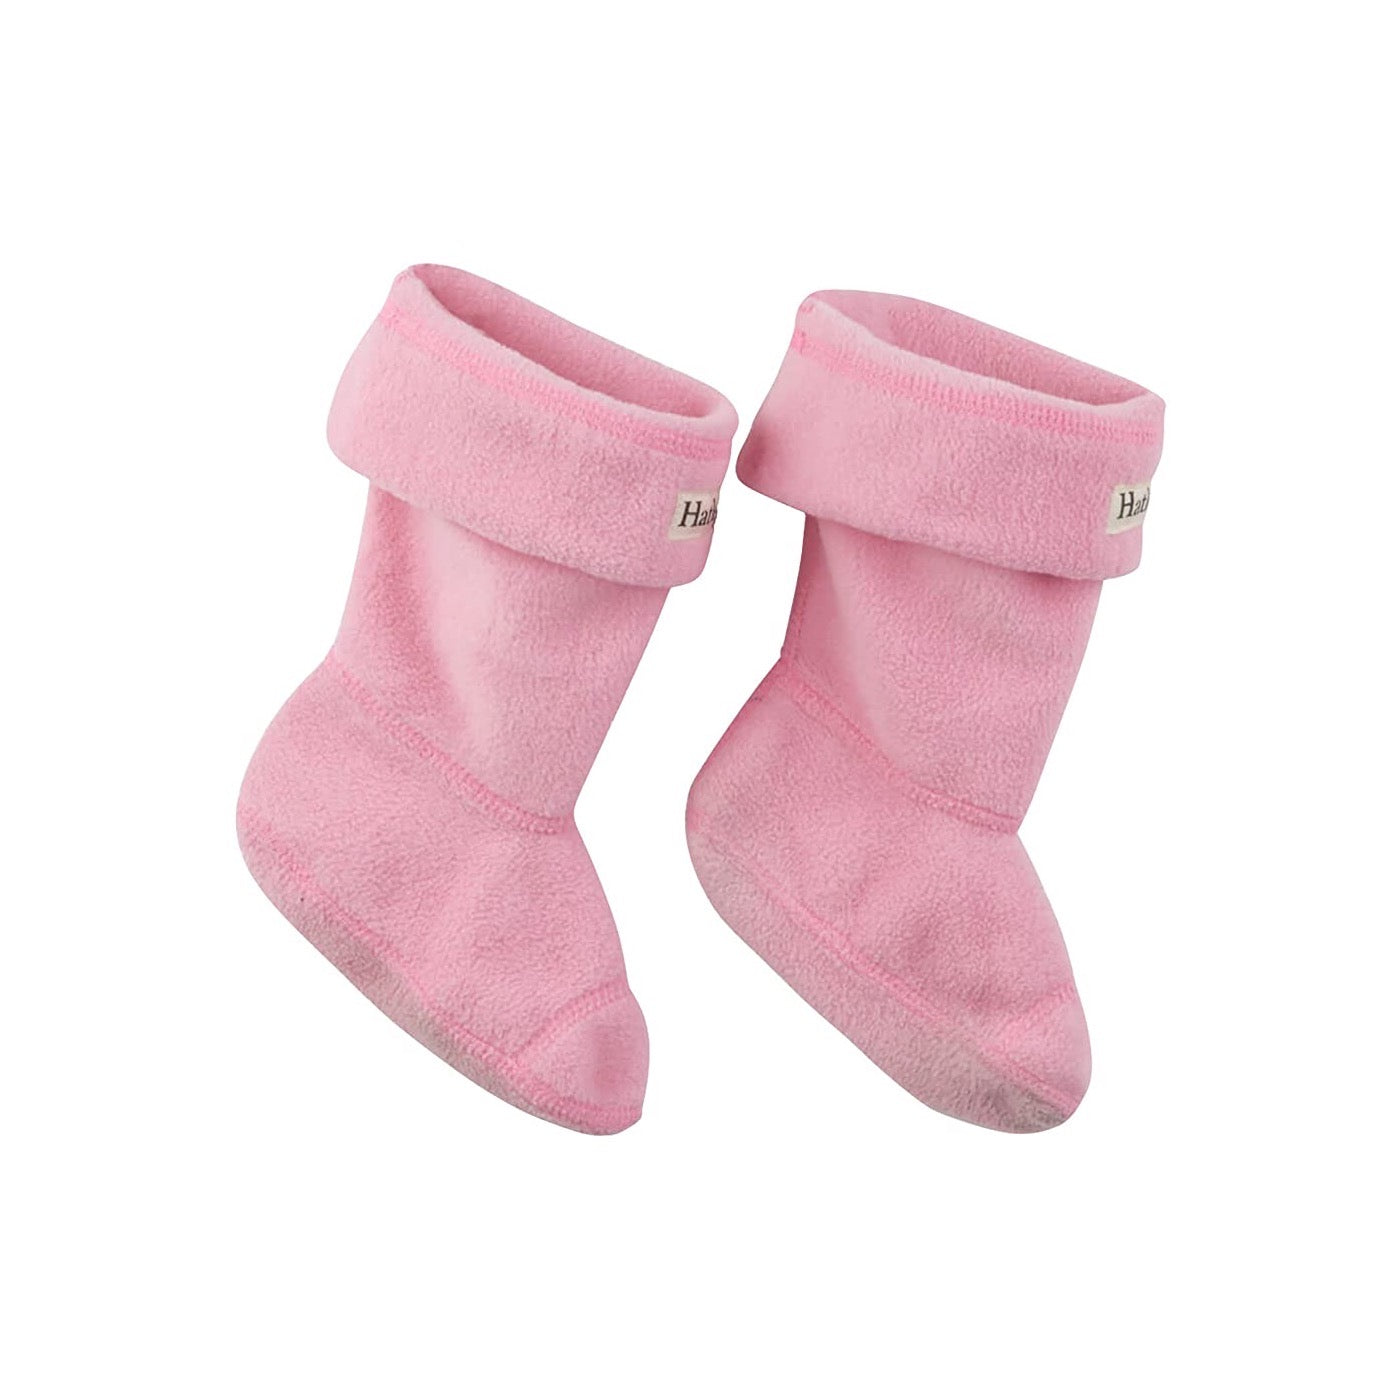 Hatley Welly Socks Bl0pink408 Pink Clothing X SMALL / Pink,SMALL / Pink,MEDIUM / Pink,LARGE / Pink